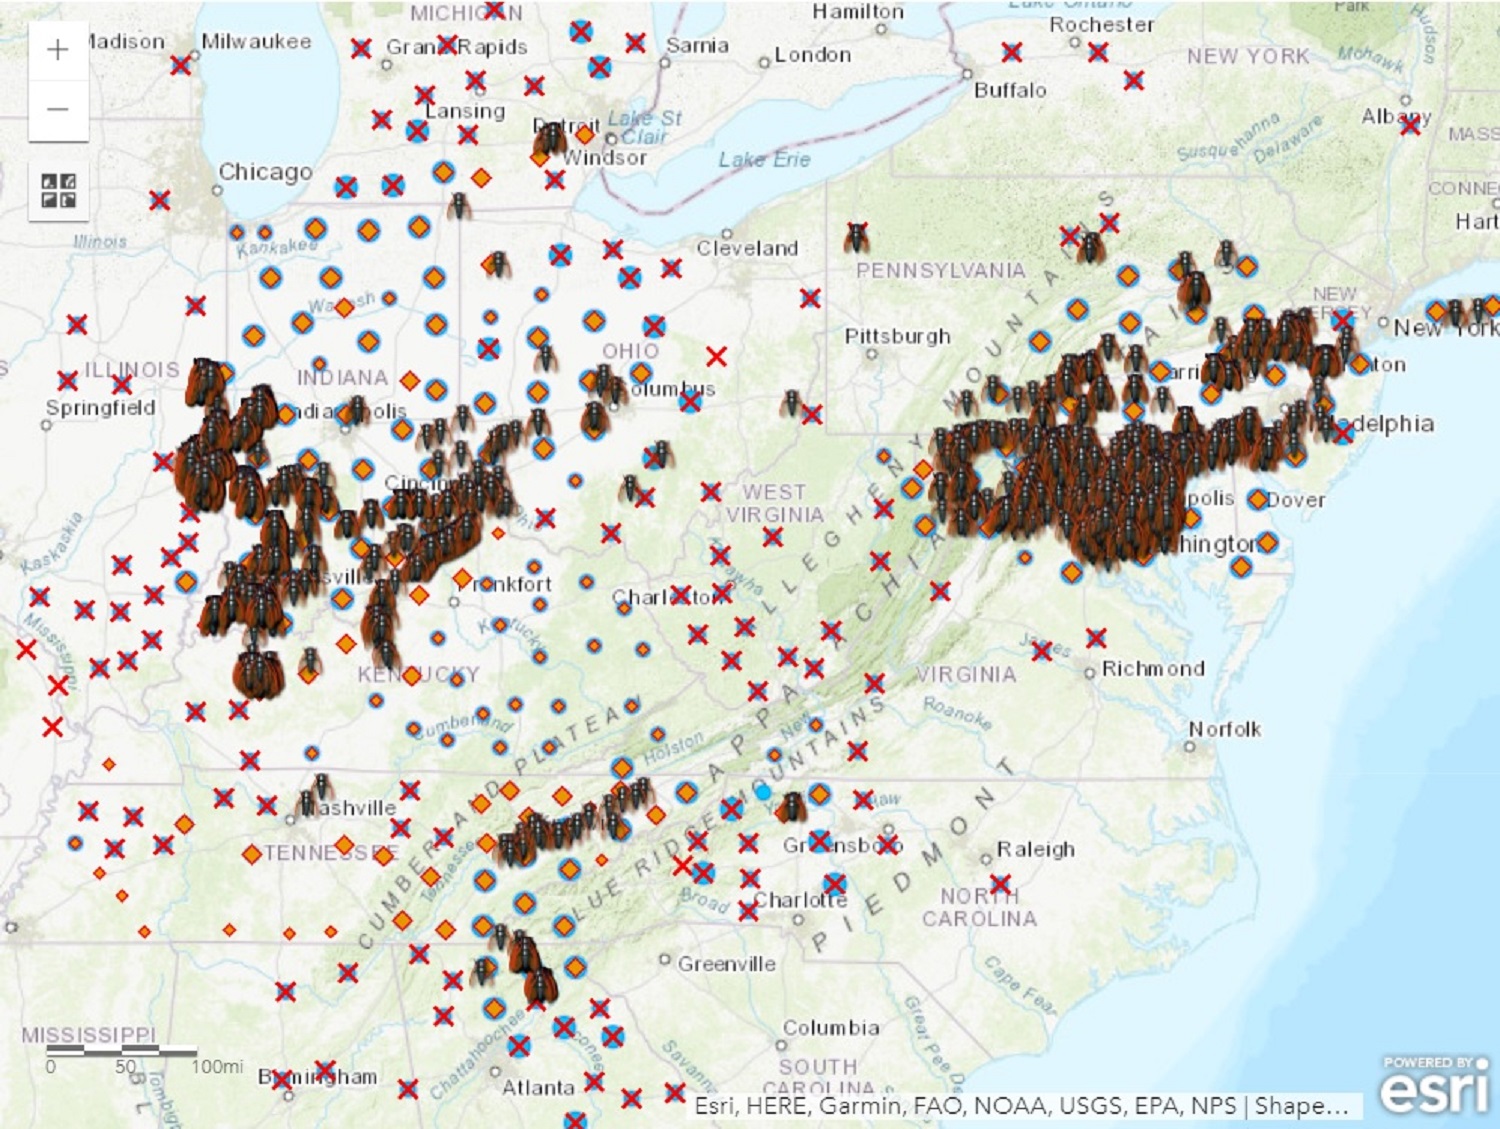 Eastern half of the US with pins and cicada symbols based on past records concentrated in the Northeast and Midwest